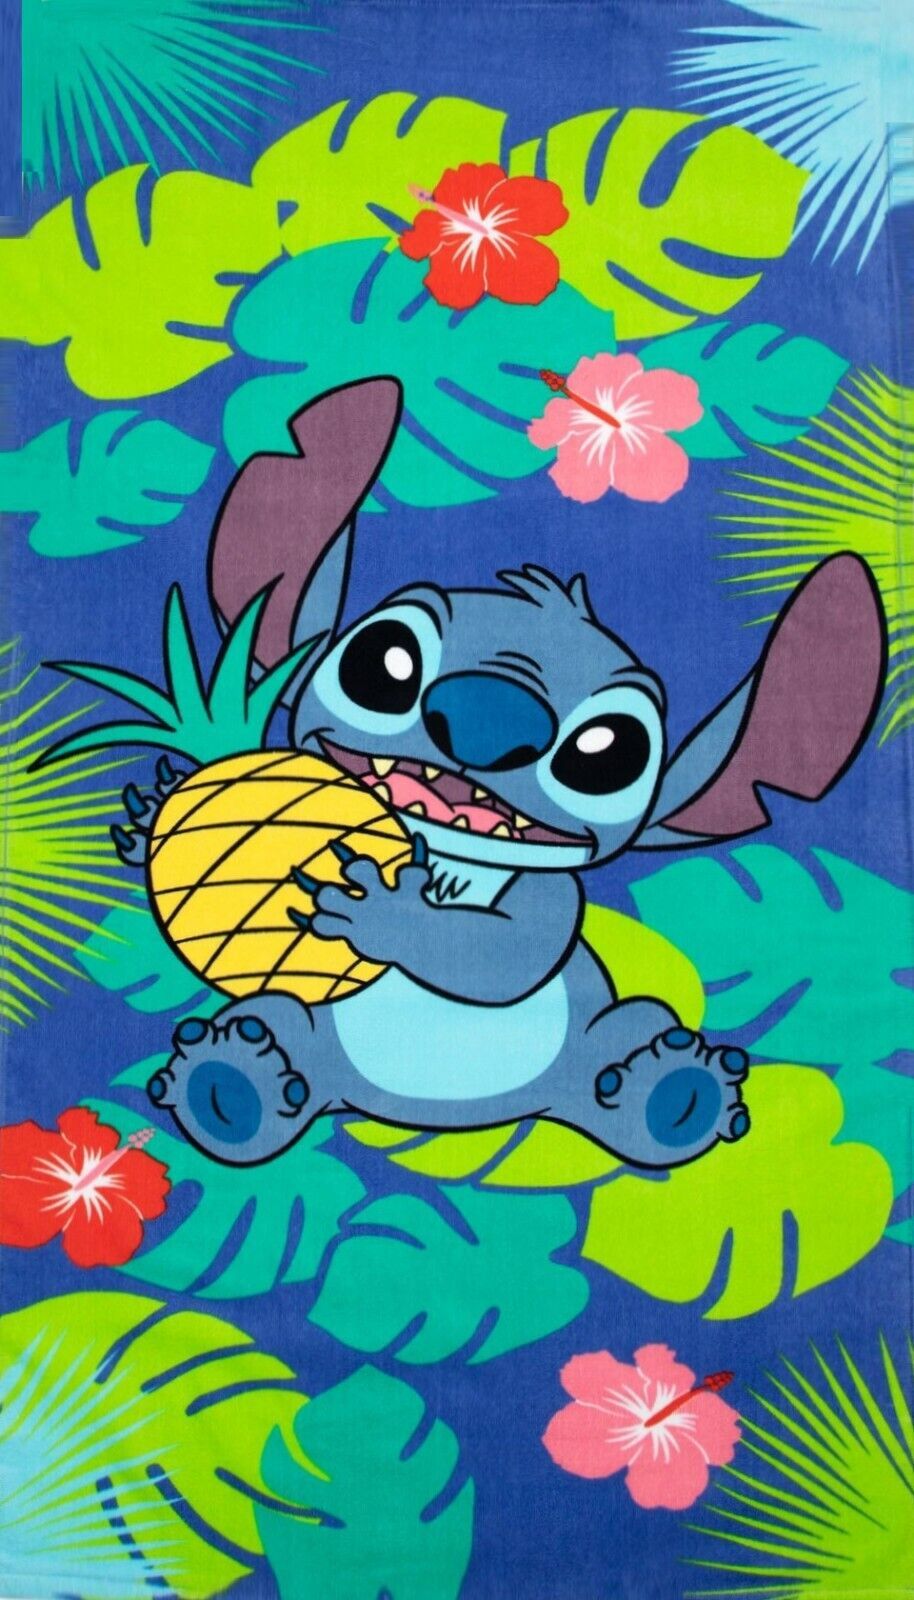 Stitch Tropical Bliss Kids Beach Towel measures 28 x 58 inches